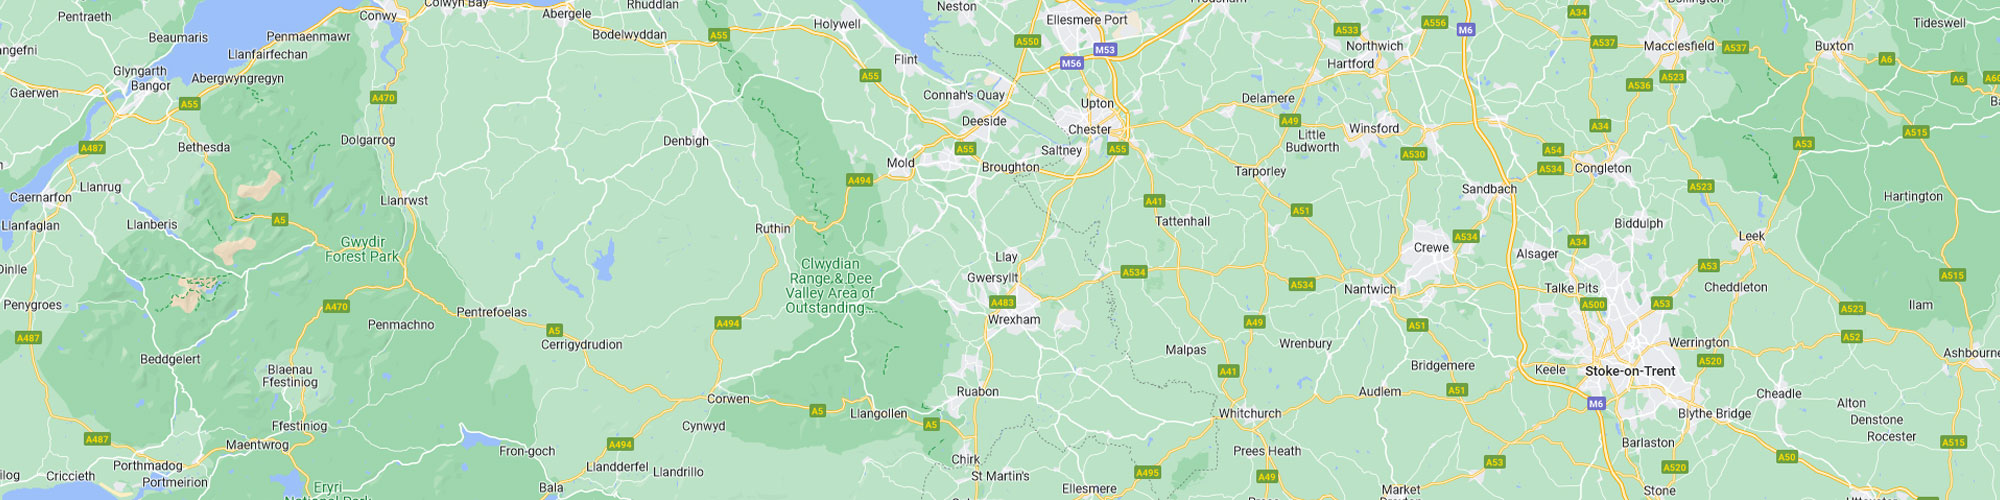 Map of Wrexham & Chester where Grow Sales + Lettings Estate Agents operate